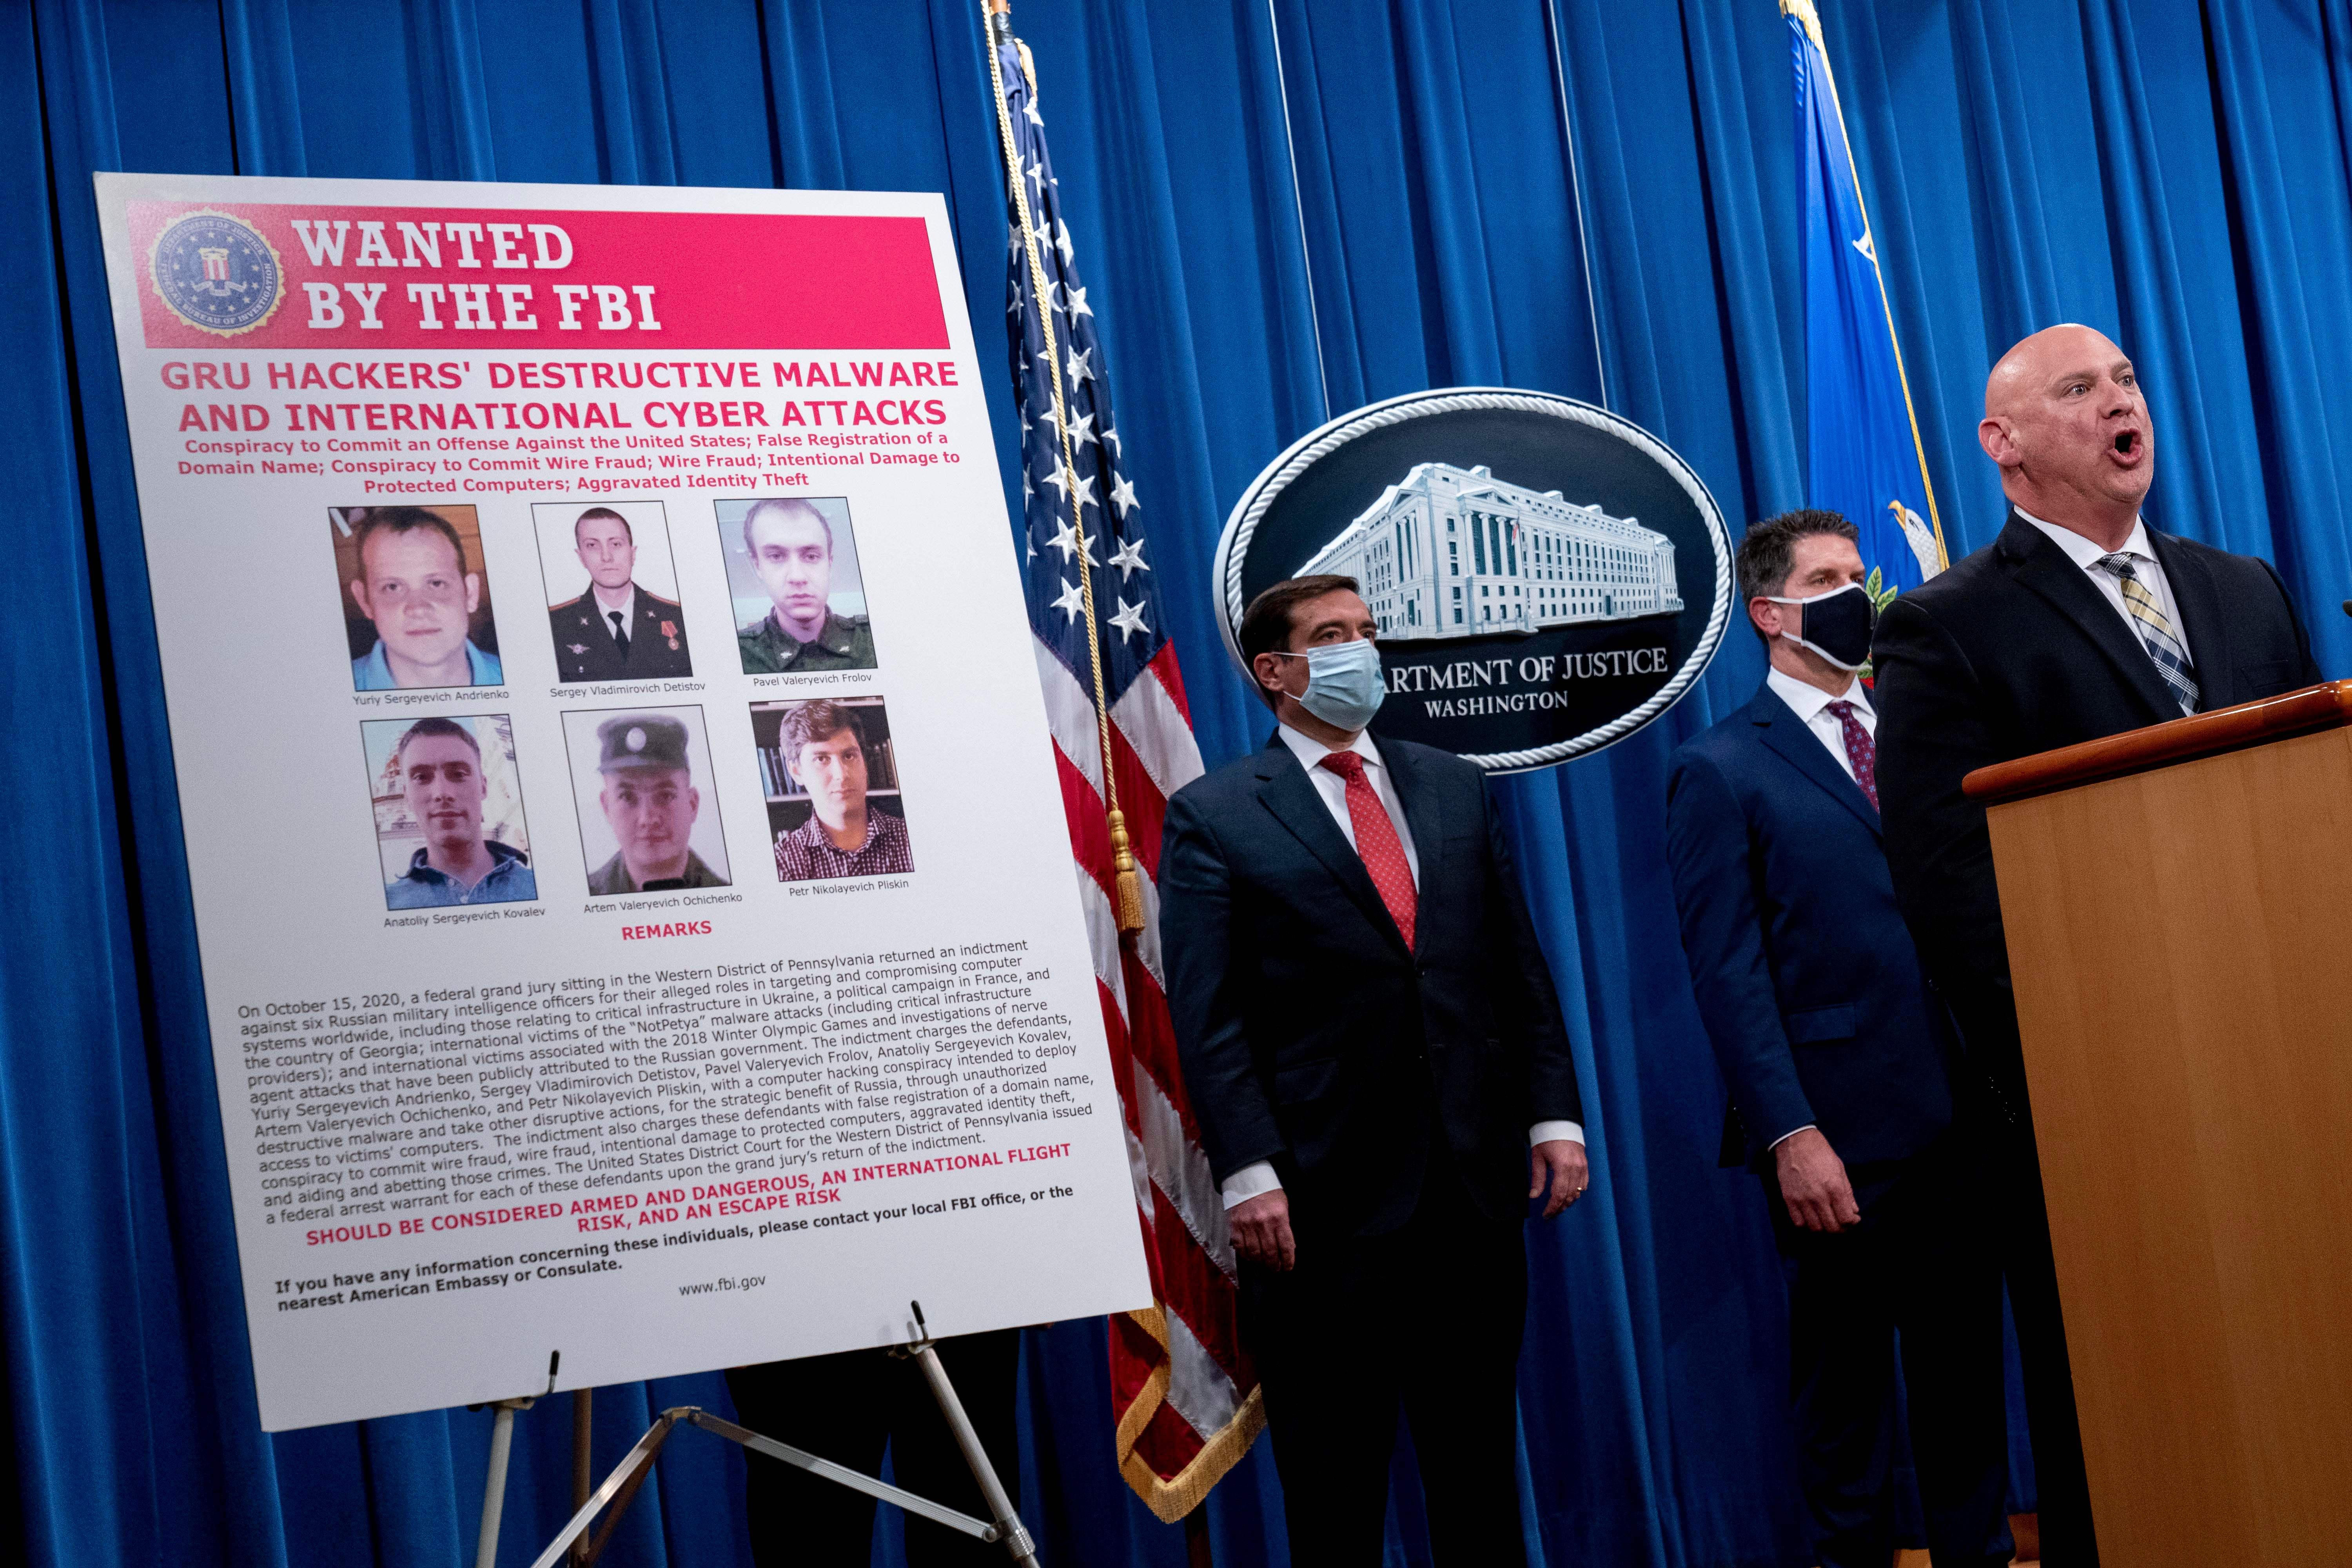 A man speaks at a lectern in front of two men wearing masks and a Wanted poster showing six men wanted by the FBI. 